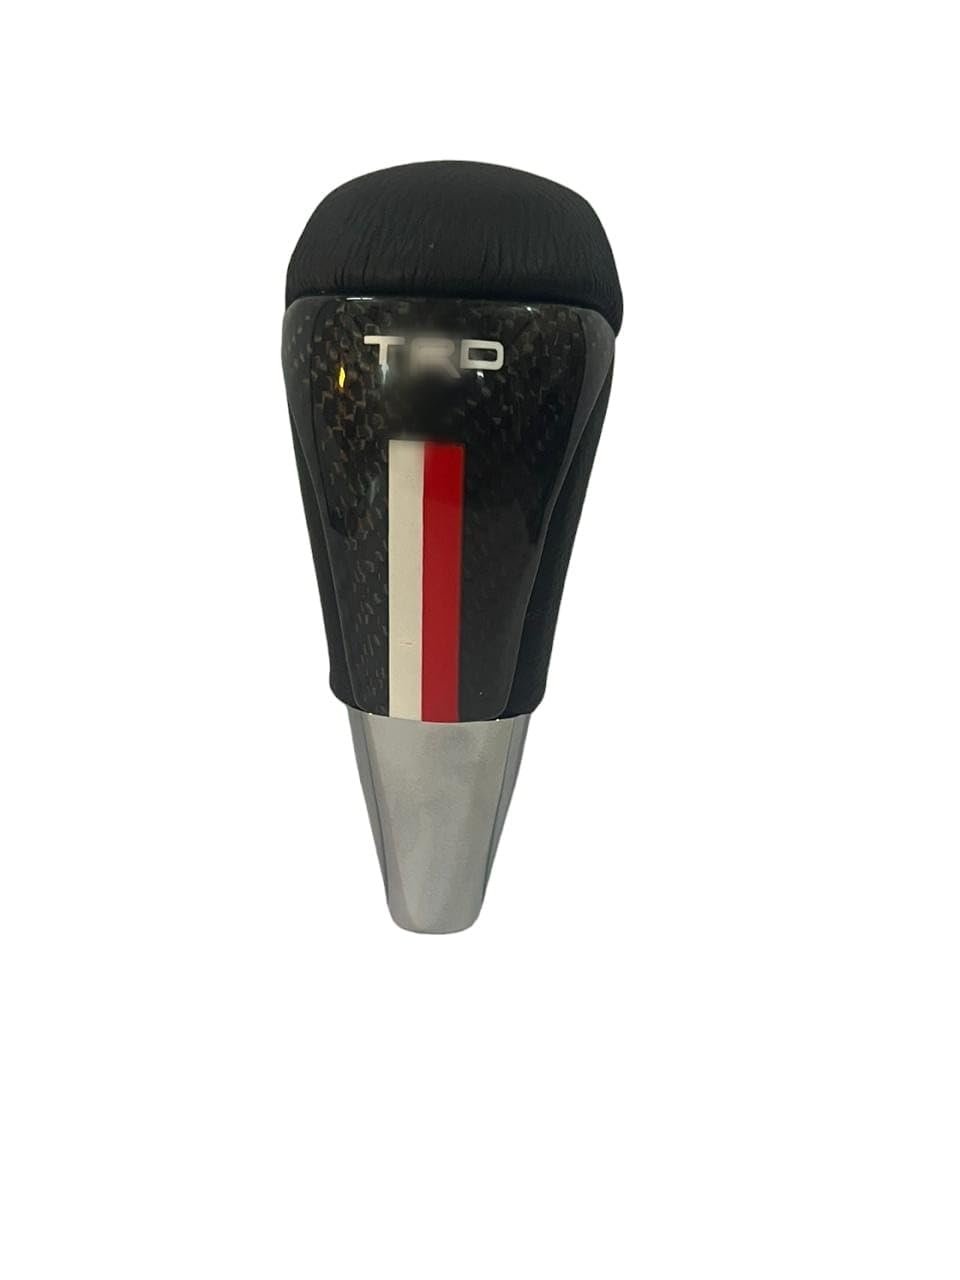 Carbon Gear Knob TRD White/Red Design Compatible with Toyota Cars Image 